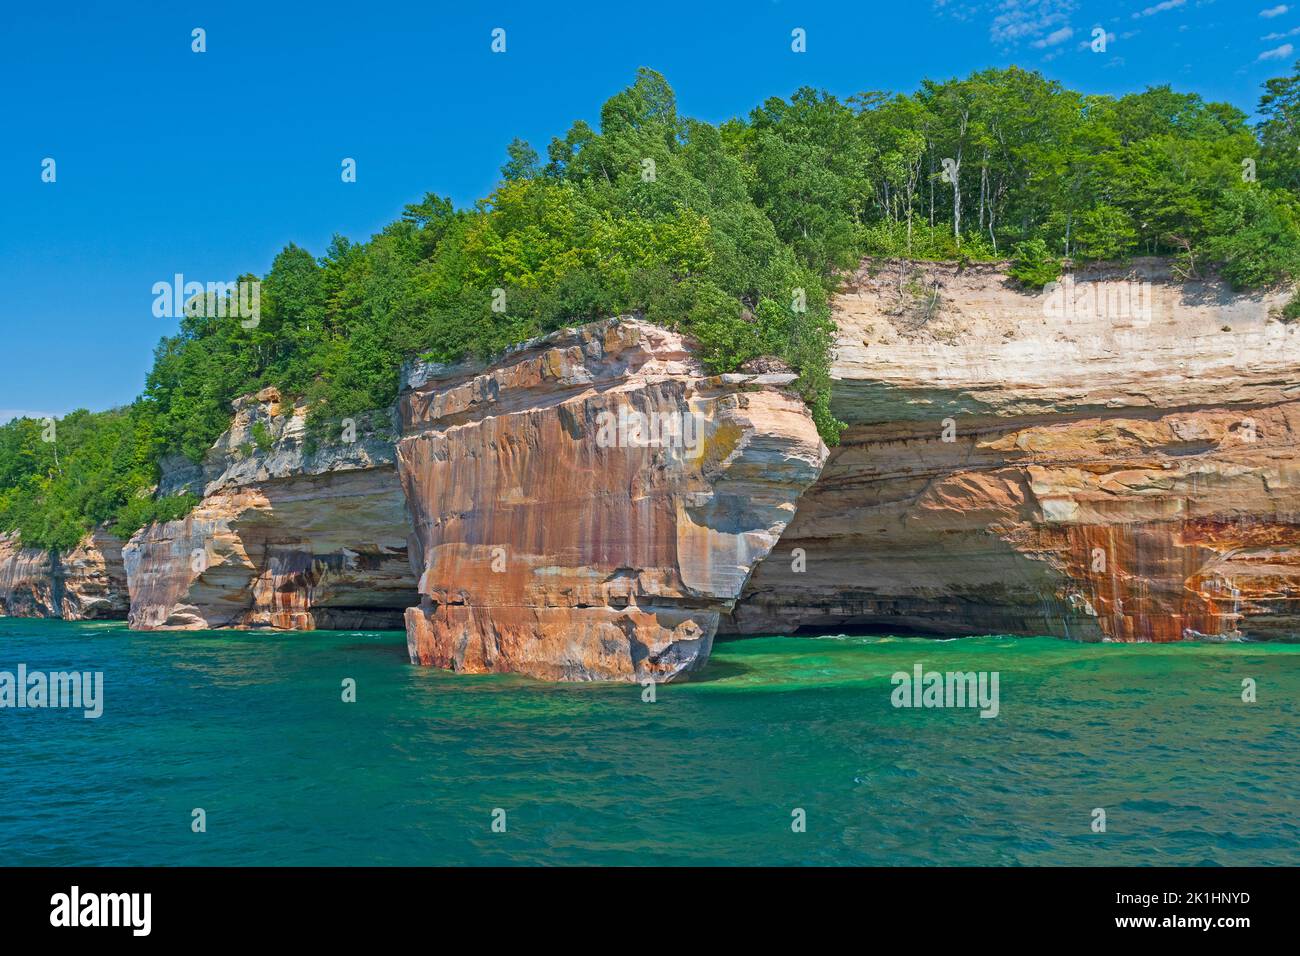 A Flowerpot Rock on a Colorful Lakeshore on Pictured Rocks National Lakeshore on Lake Superior in Michigan Stock Photo